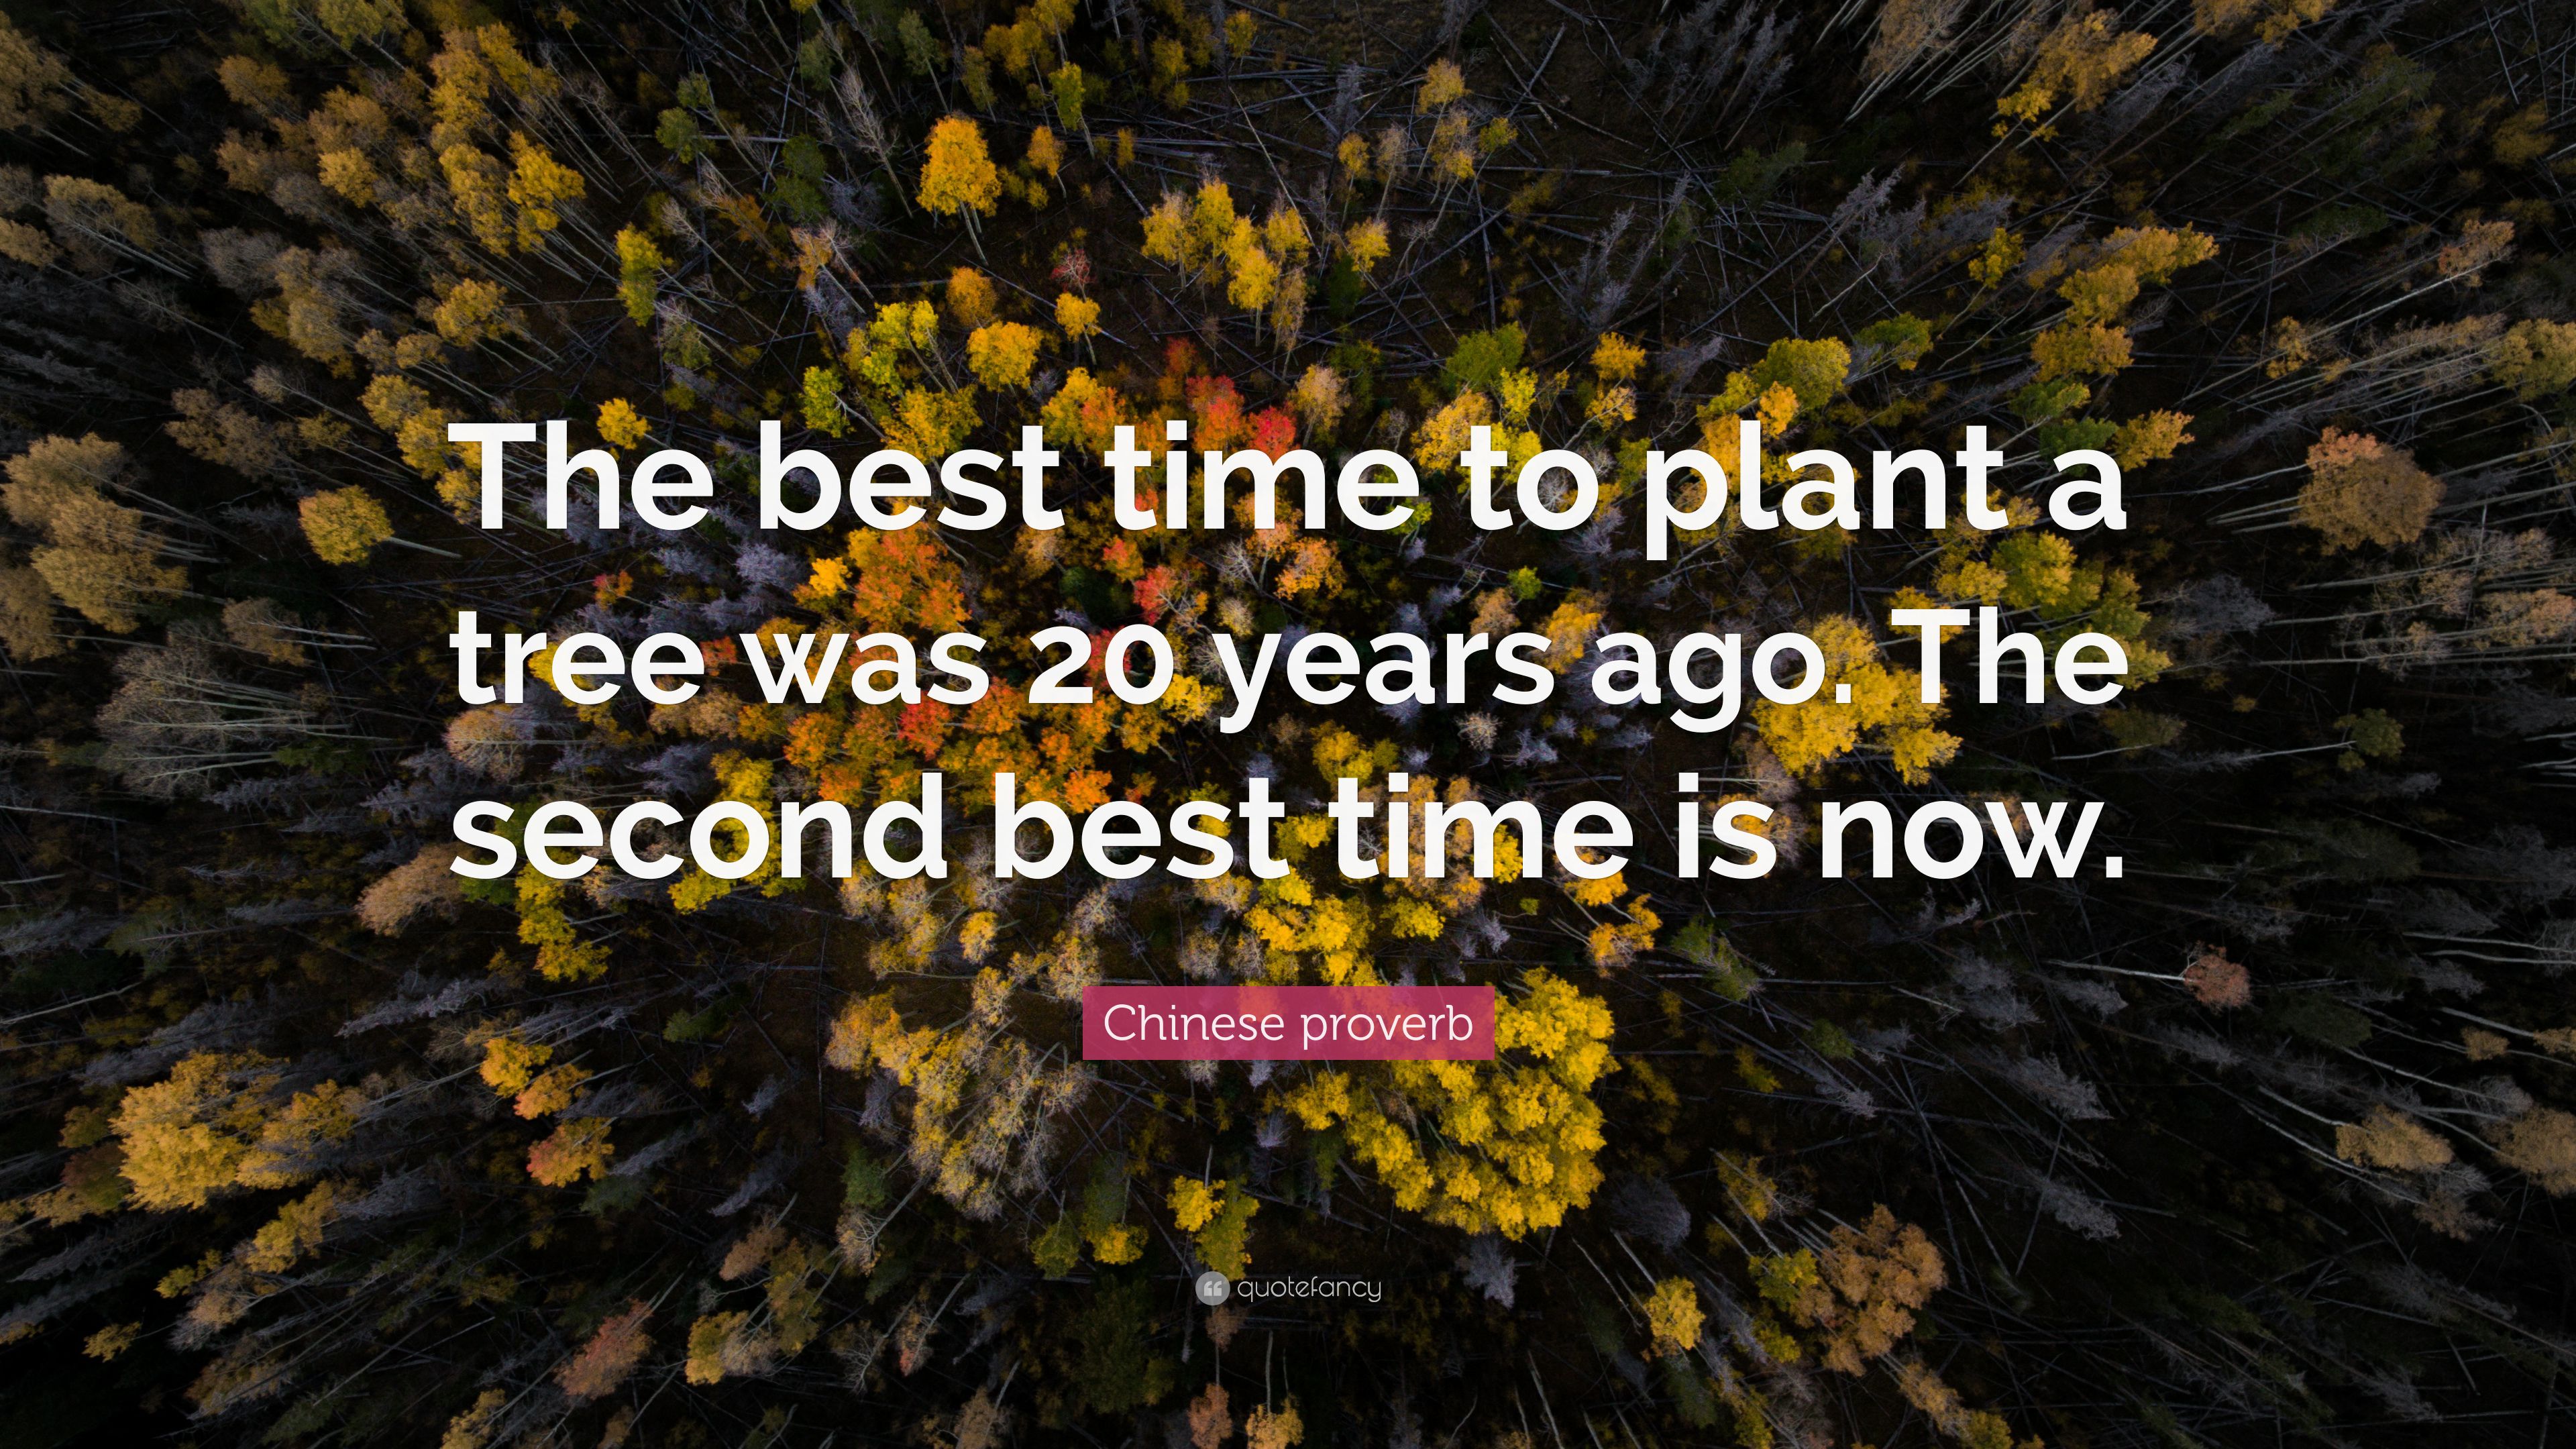 Chinese proverb Quote: “The best time to plant a tree was 20 years